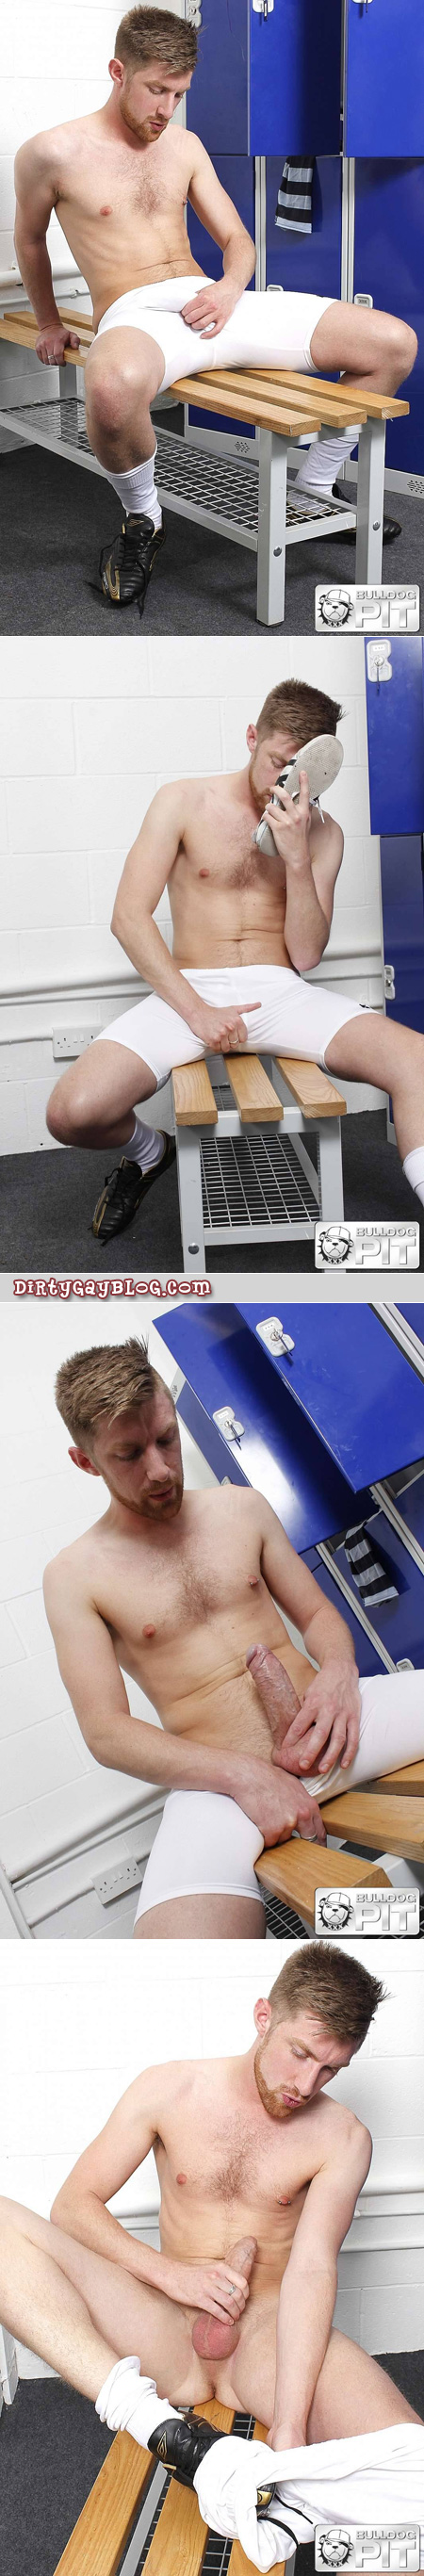 Scruffy blonde soccer player rubbing his hard dick through his compression shorts.